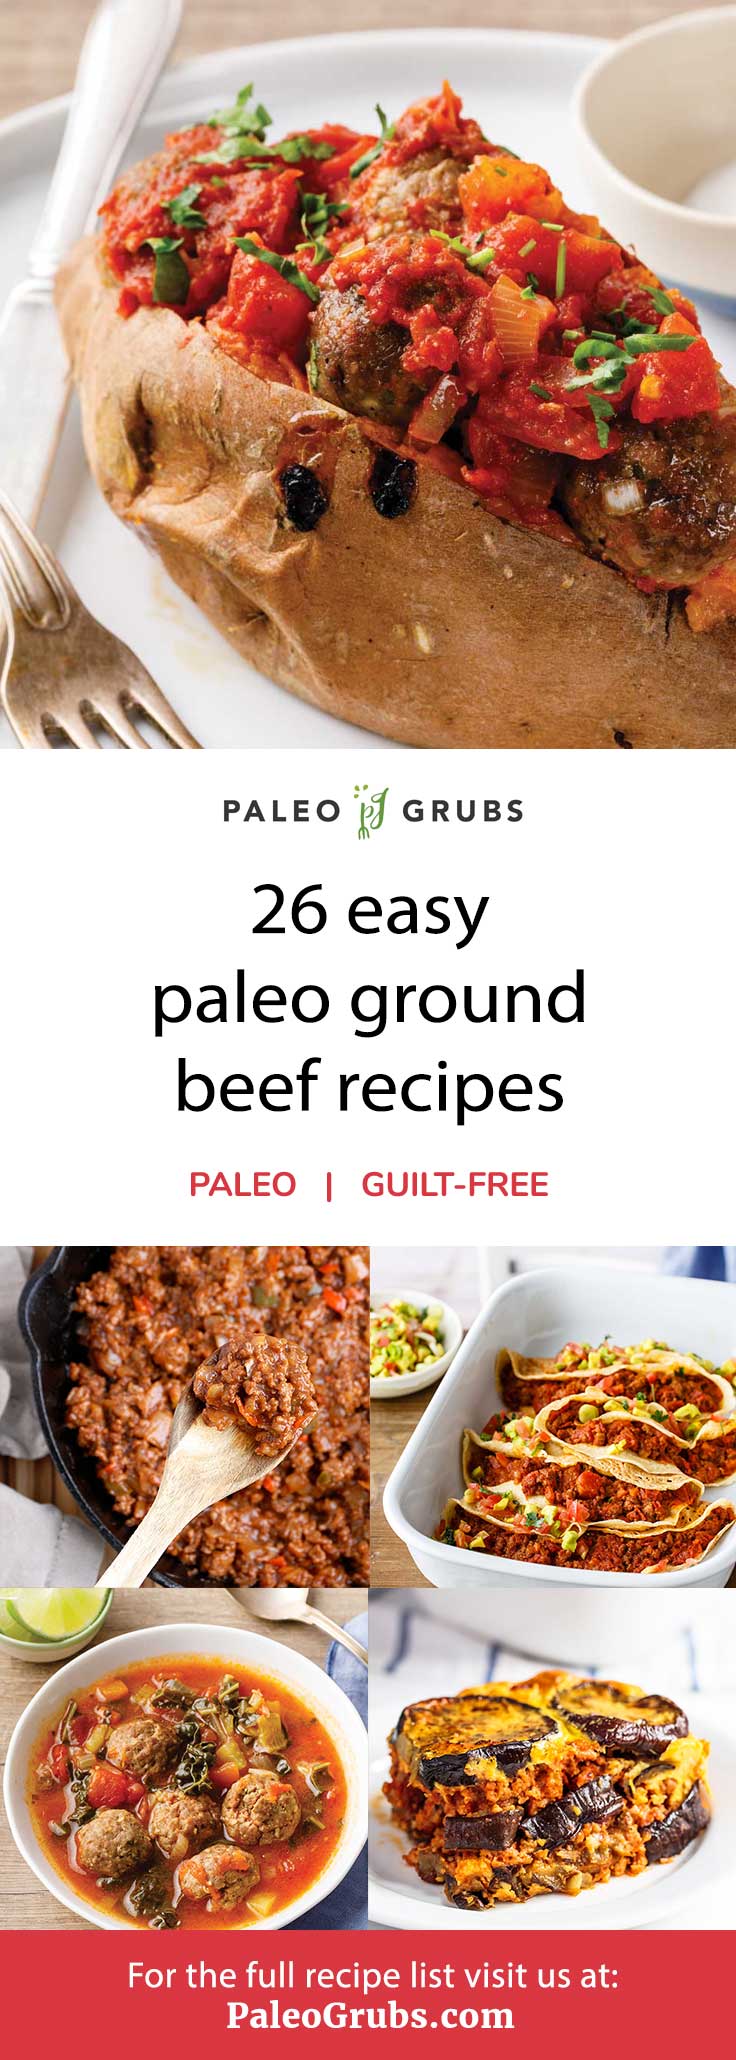 Here is a great list of delicious paleo ground beef recipes. These are so easy to make and one of my favorites when I need to pull together a quick meal.